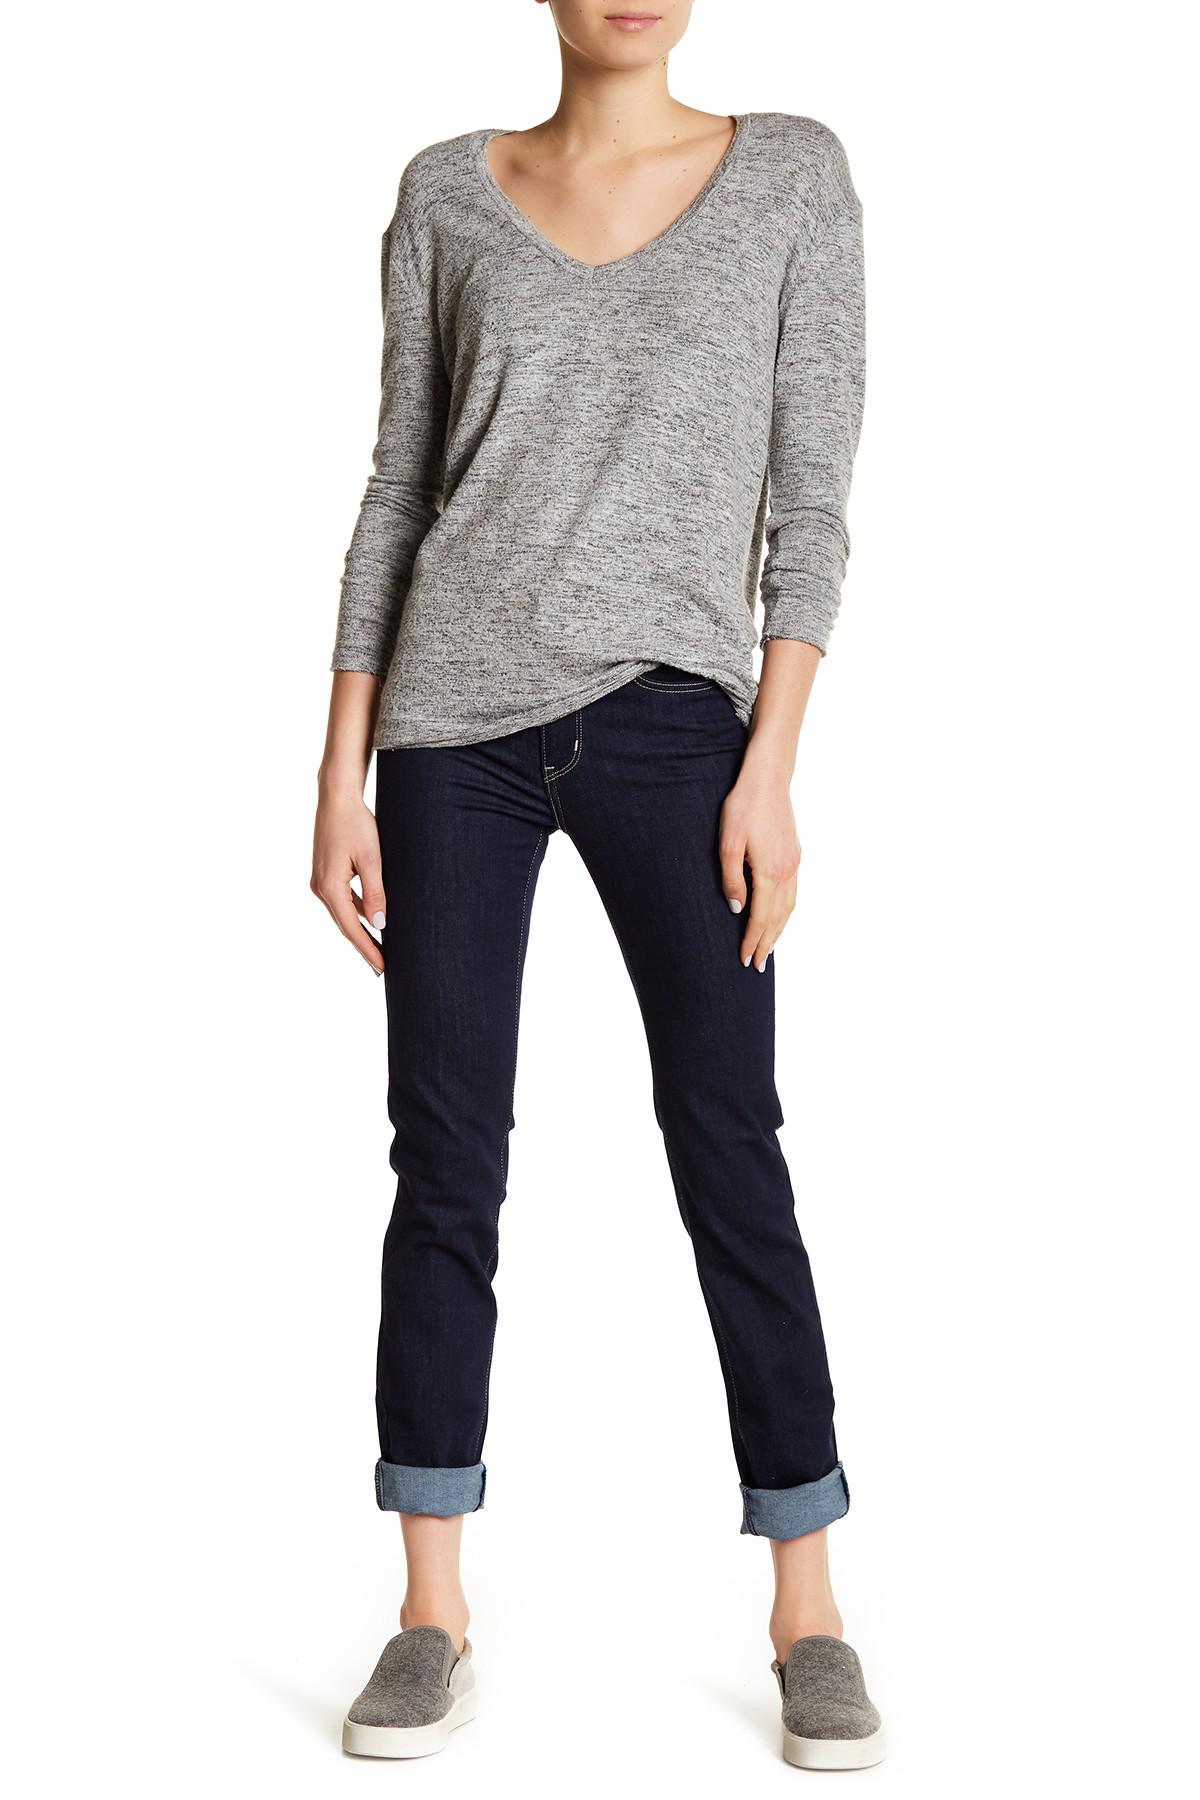 Levi's Slimming Slim Fit Jeans in Blue | Lyst